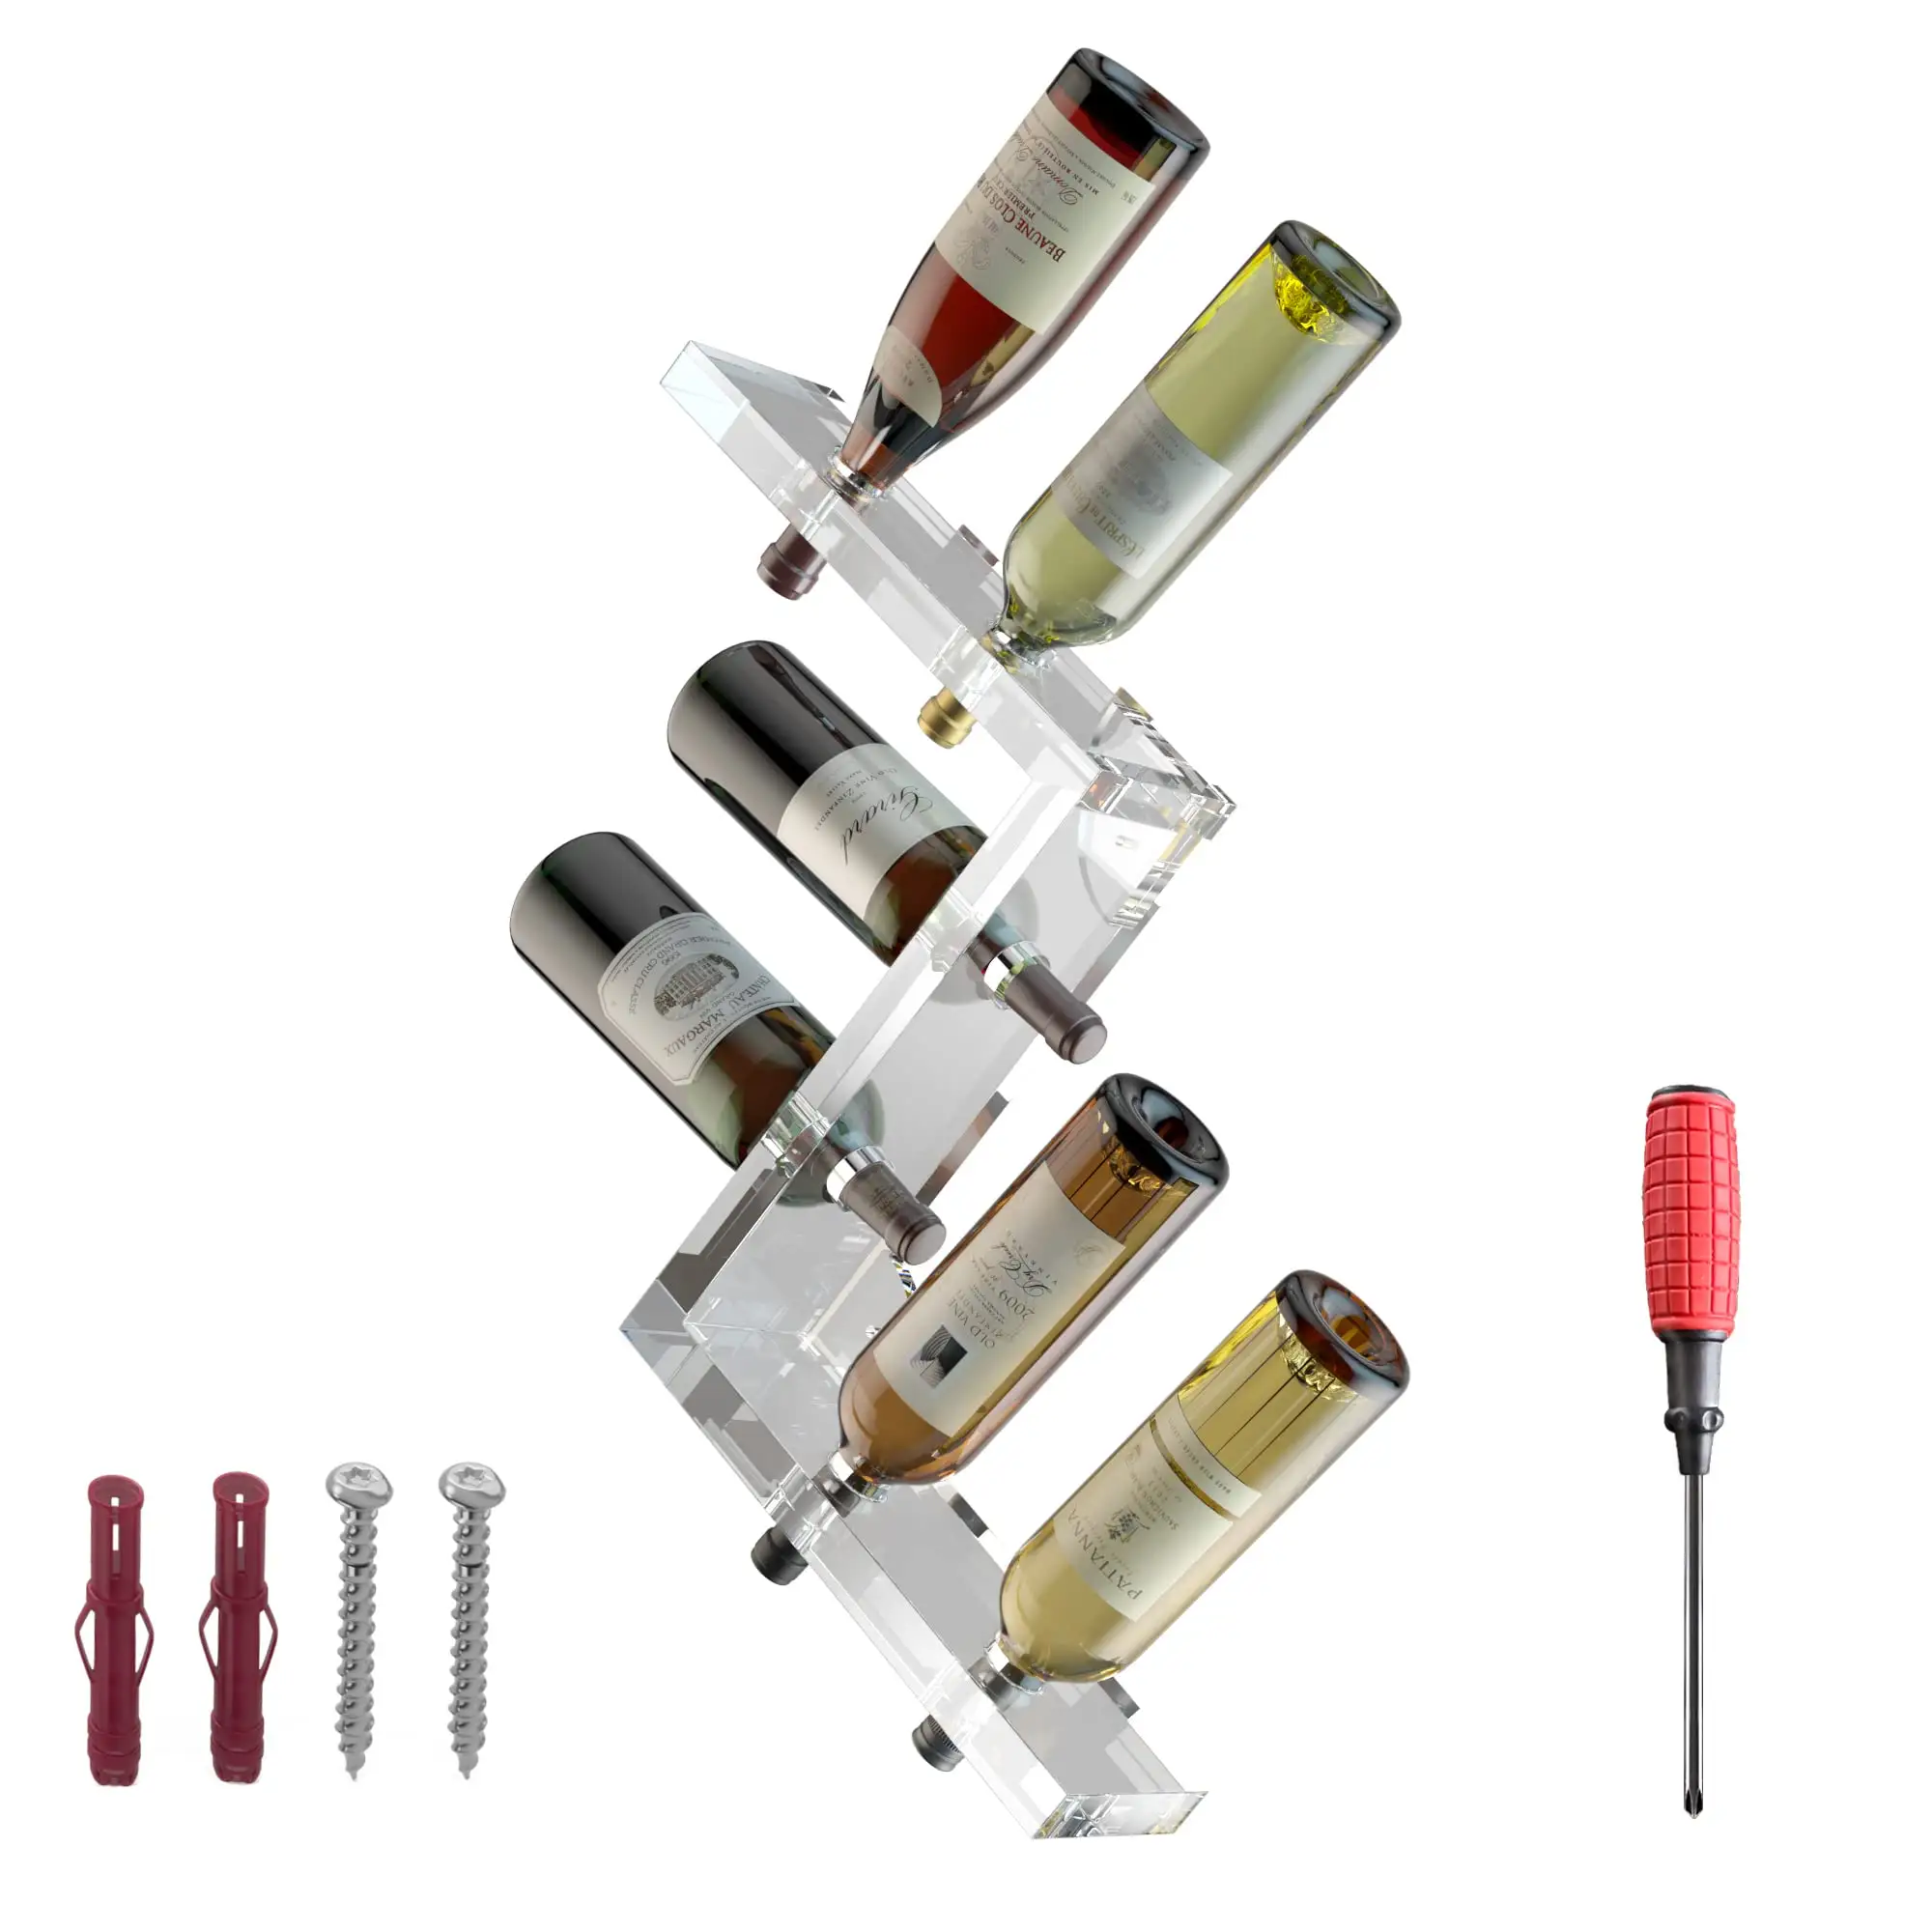 Wall mounted wine rack wine bottle holder modern home decor Perfect for Kitchen Dining Room or Wine Bar Holds 6 Standard Sized